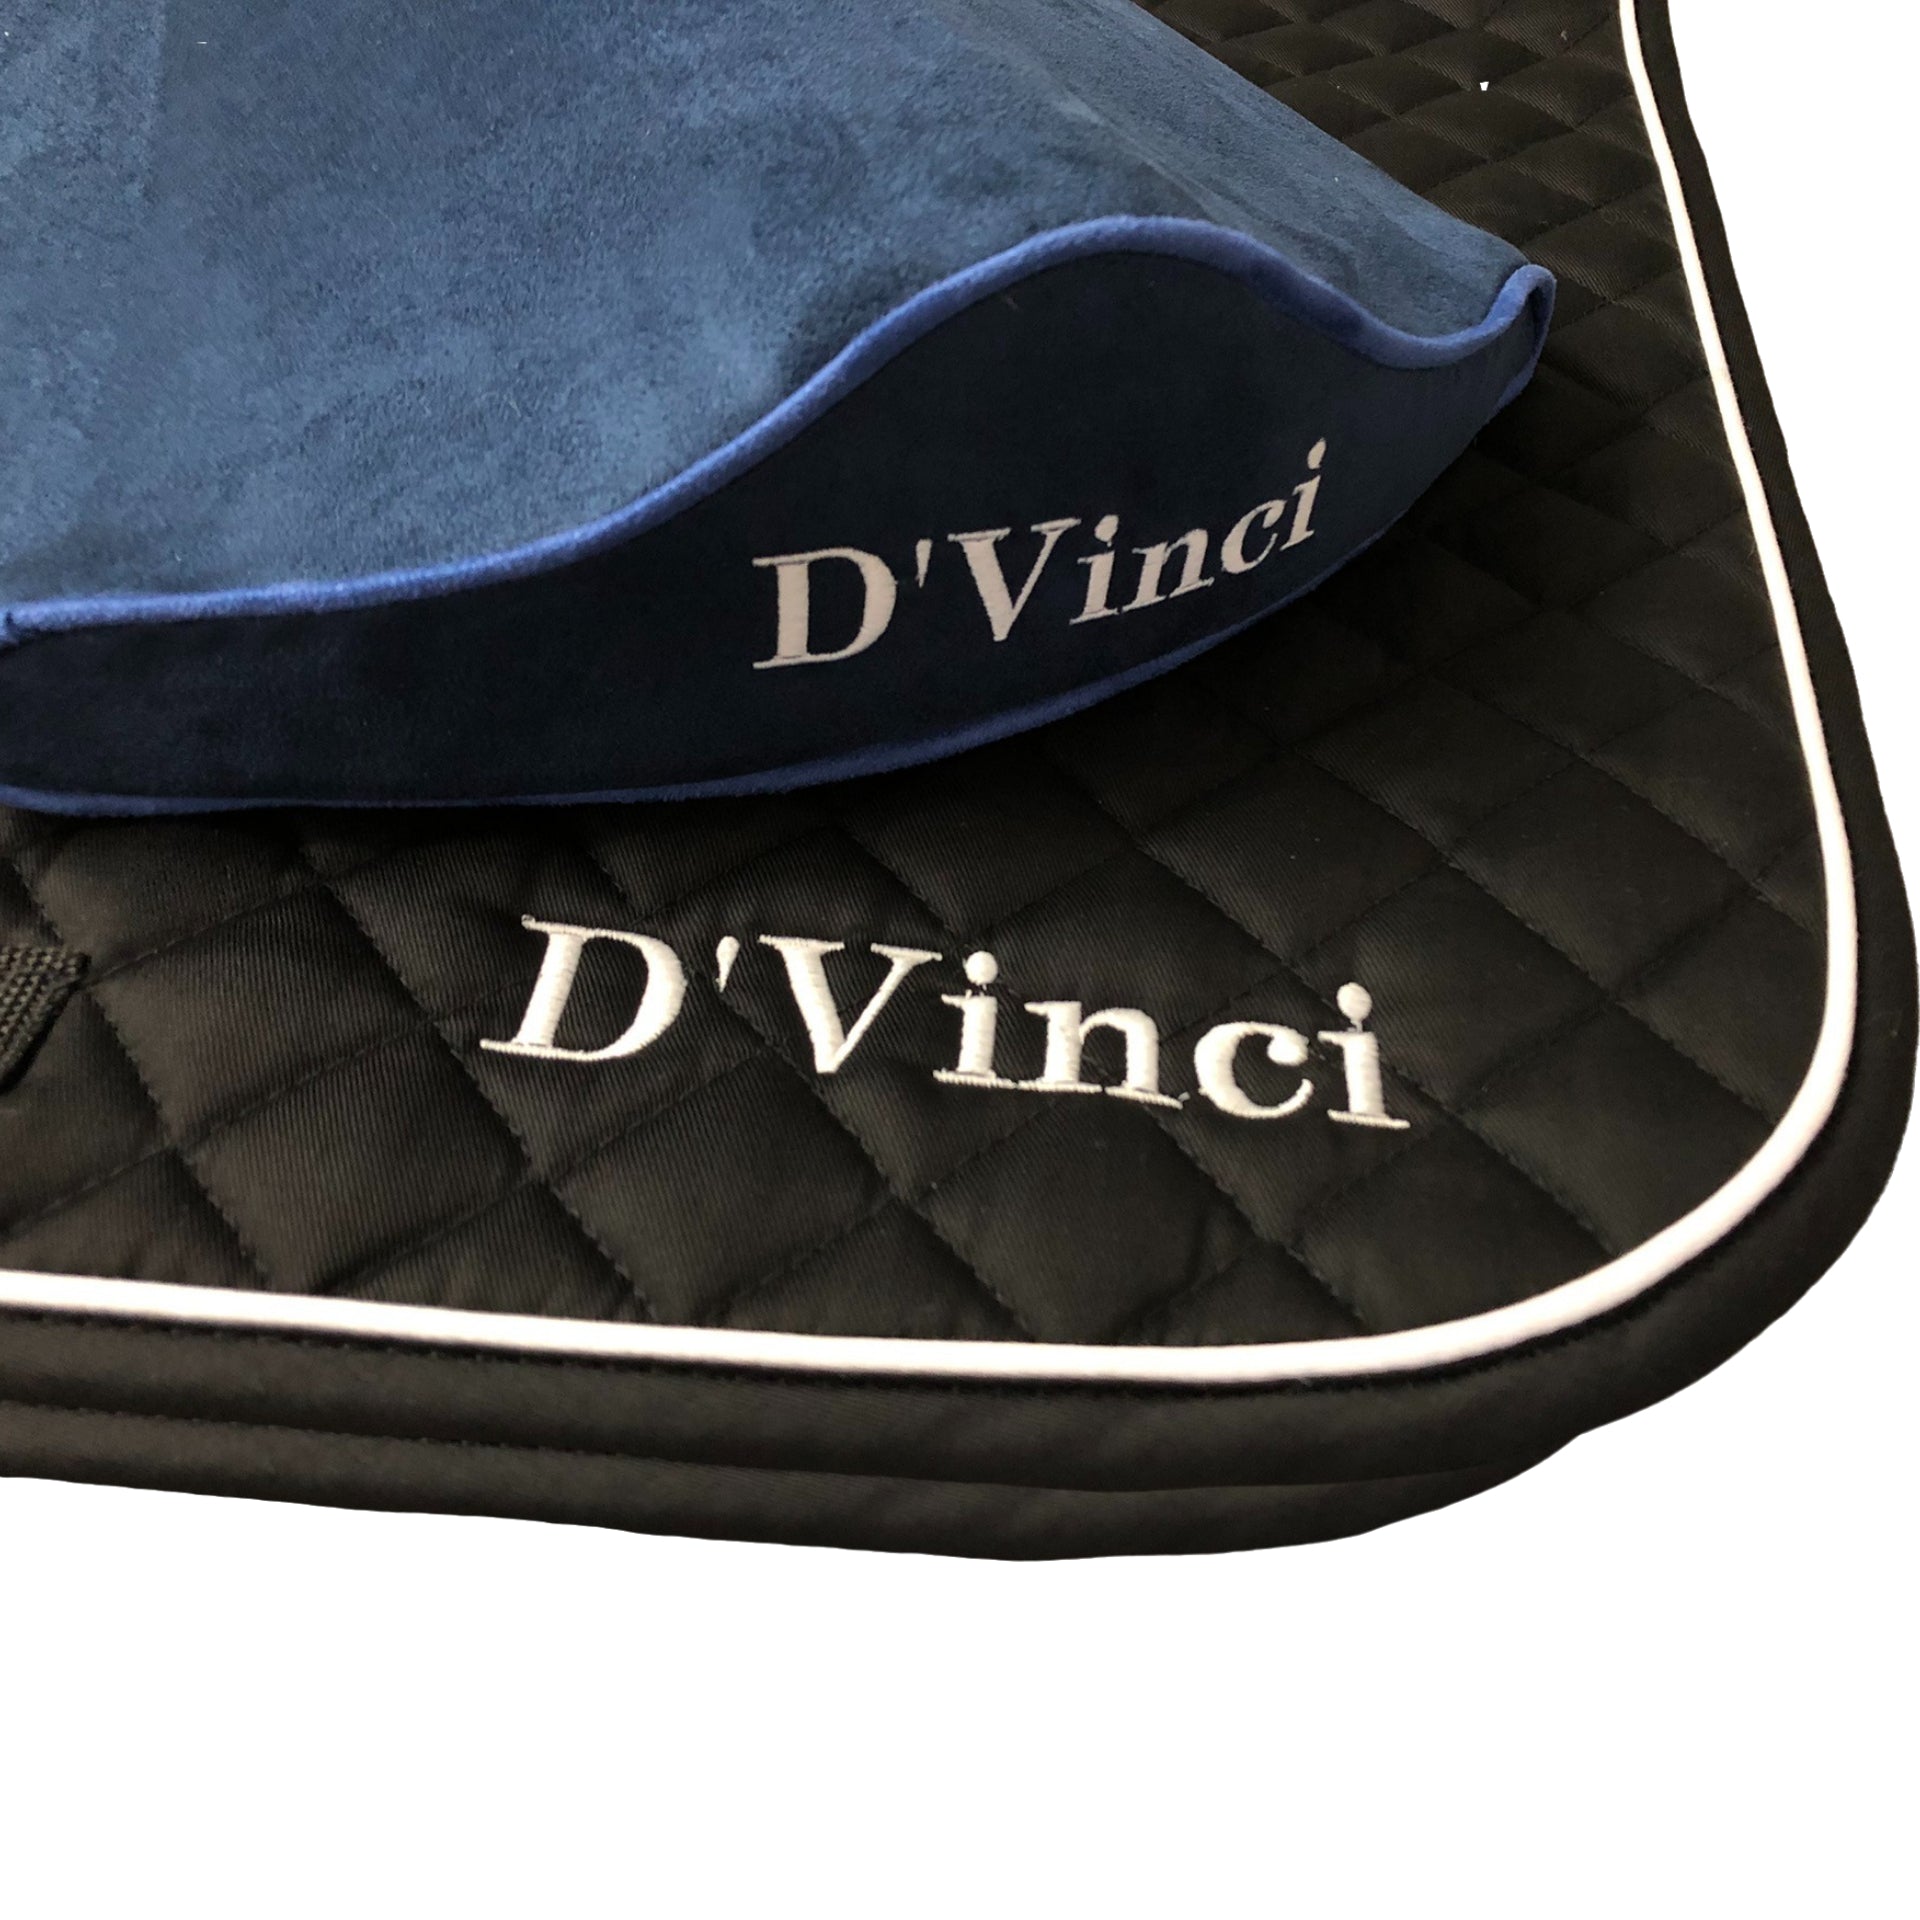 SaddleMattress Supreme - Personalized in Black or Dark Blue with matching Black Saddle Pad